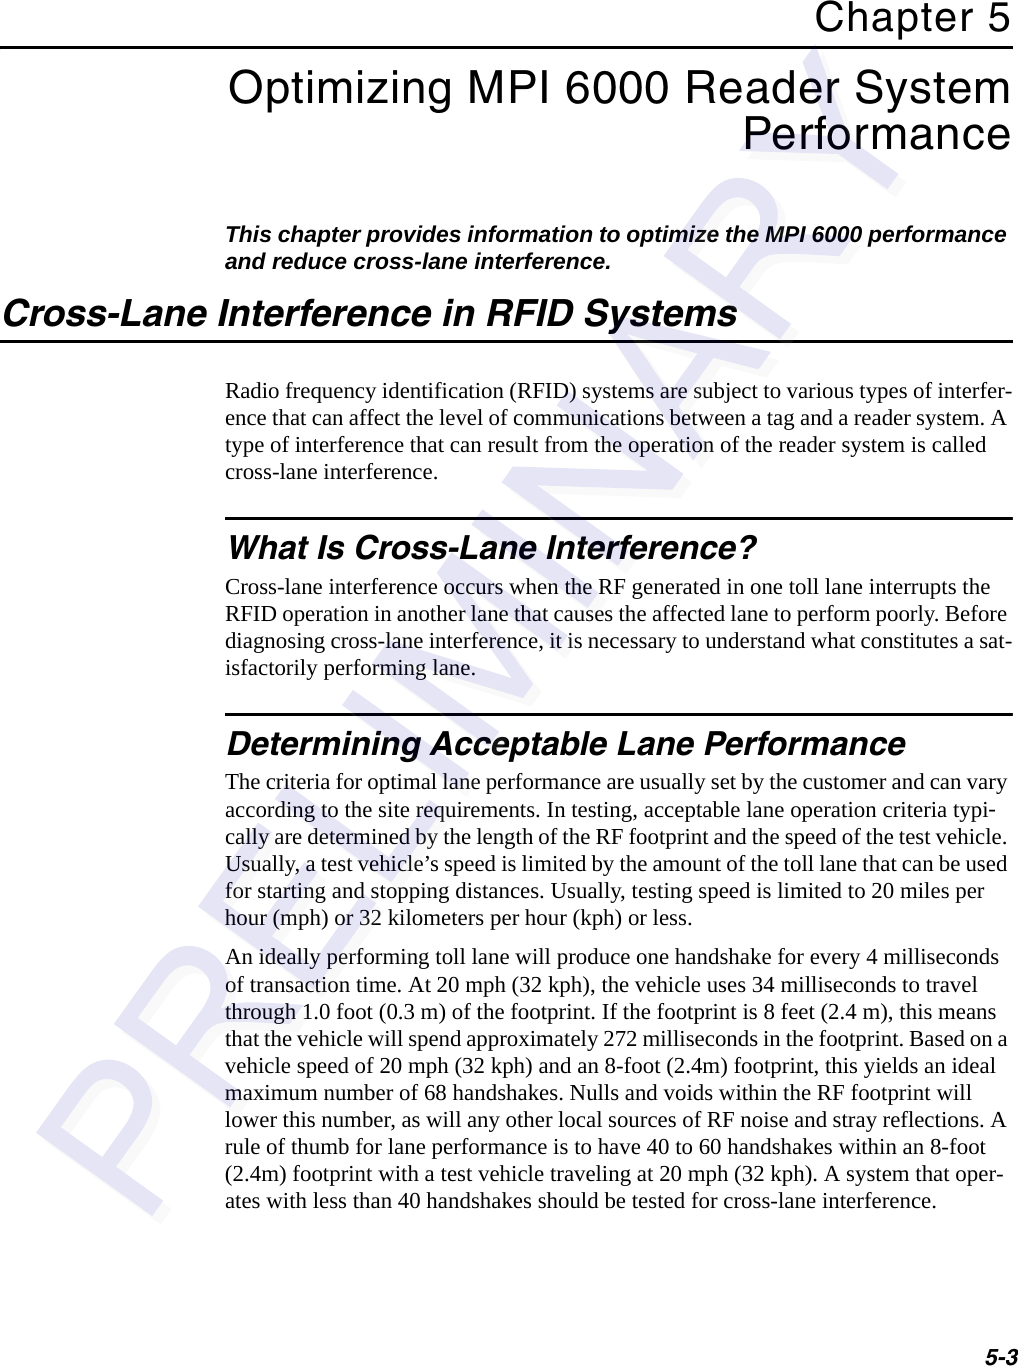 5-3Chapter 5Optimizing MPI 6000 Reader System PerformanceThis chapter provides information to optimize the MPI 6000 performance and reduce cross-lane interference.Cross-Lane Interference in RFID SystemsRadio frequency identification (RFID) systems are subject to various types of interfer-ence that can affect the level of communications between a tag and a reader system. A type of interference that can result from the operation of the reader system is called cross-lane interference.What Is Cross-Lane Interference?Cross-lane interference occurs when the RF generated in one toll lane interrupts the RFID operation in another lane that causes the affected lane to perform poorly. Before diagnosing cross-lane interference, it is necessary to understand what constitutes a sat-isfactorily performing lane.Determining Acceptable Lane PerformanceThe criteria for optimal lane performance are usually set by the customer and can vary according to the site requirements. In testing, acceptable lane operation criteria typi-cally are determined by the length of the RF footprint and the speed of the test vehicle. Usually, a test vehicle’s speed is limited by the amount of the toll lane that can be used for starting and stopping distances. Usually, testing speed is limited to 20 miles per hour (mph) or 32 kilometers per hour (kph) or less.An ideally performing toll lane will produce one handshake for every 4 milliseconds of transaction time. At 20 mph (32 kph), the vehicle uses 34 milliseconds to travel through 1.0 foot (0.3 m) of the footprint. If the footprint is 8 feet (2.4 m), this means that the vehicle will spend approximately 272 milliseconds in the footprint. Based on a vehicle speed of 20 mph (32 kph) and an 8-foot (2.4m) footprint, this yields an ideal maximum number of 68 handshakes. Nulls and voids within the RF footprint will lower this number, as will any other local sources of RF noise and stray reflections. A rule of thumb for lane performance is to have 40 to 60 handshakes within an 8-foot (2.4m) footprint with a test vehicle traveling at 20 mph (32 kph). A system that oper-ates with less than 40 handshakes should be tested for cross-lane interference.